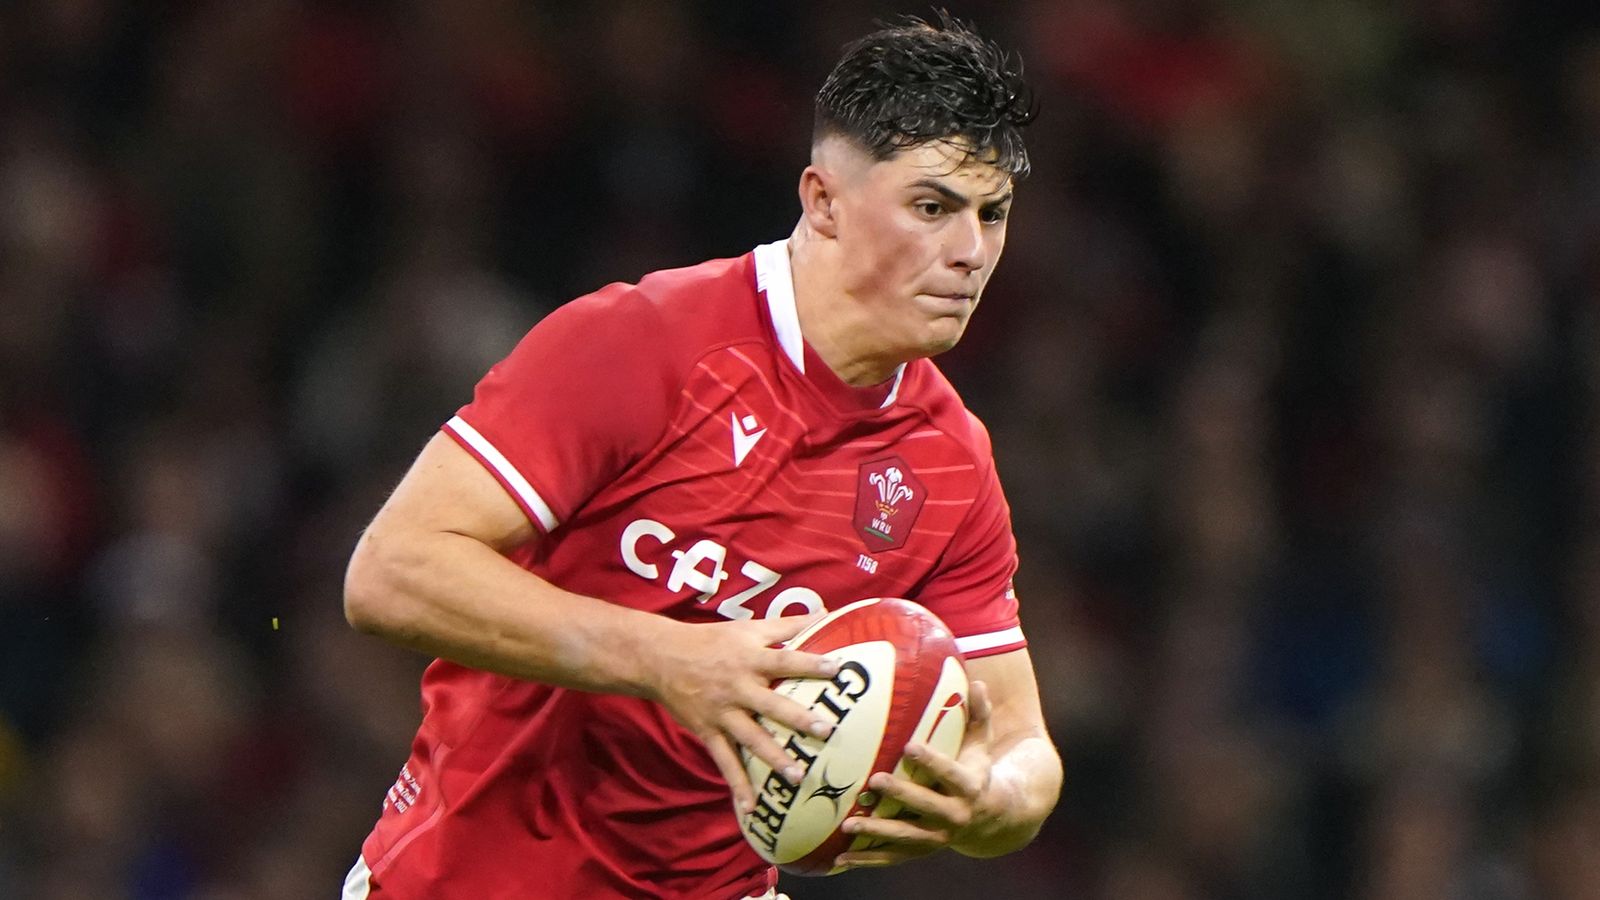 Warren Gatland makes nine changes for Wales vs England Six Nations clash Mason Grady makes debut, Louis Rees-Zammit returns Rugby Union News Sky Sports